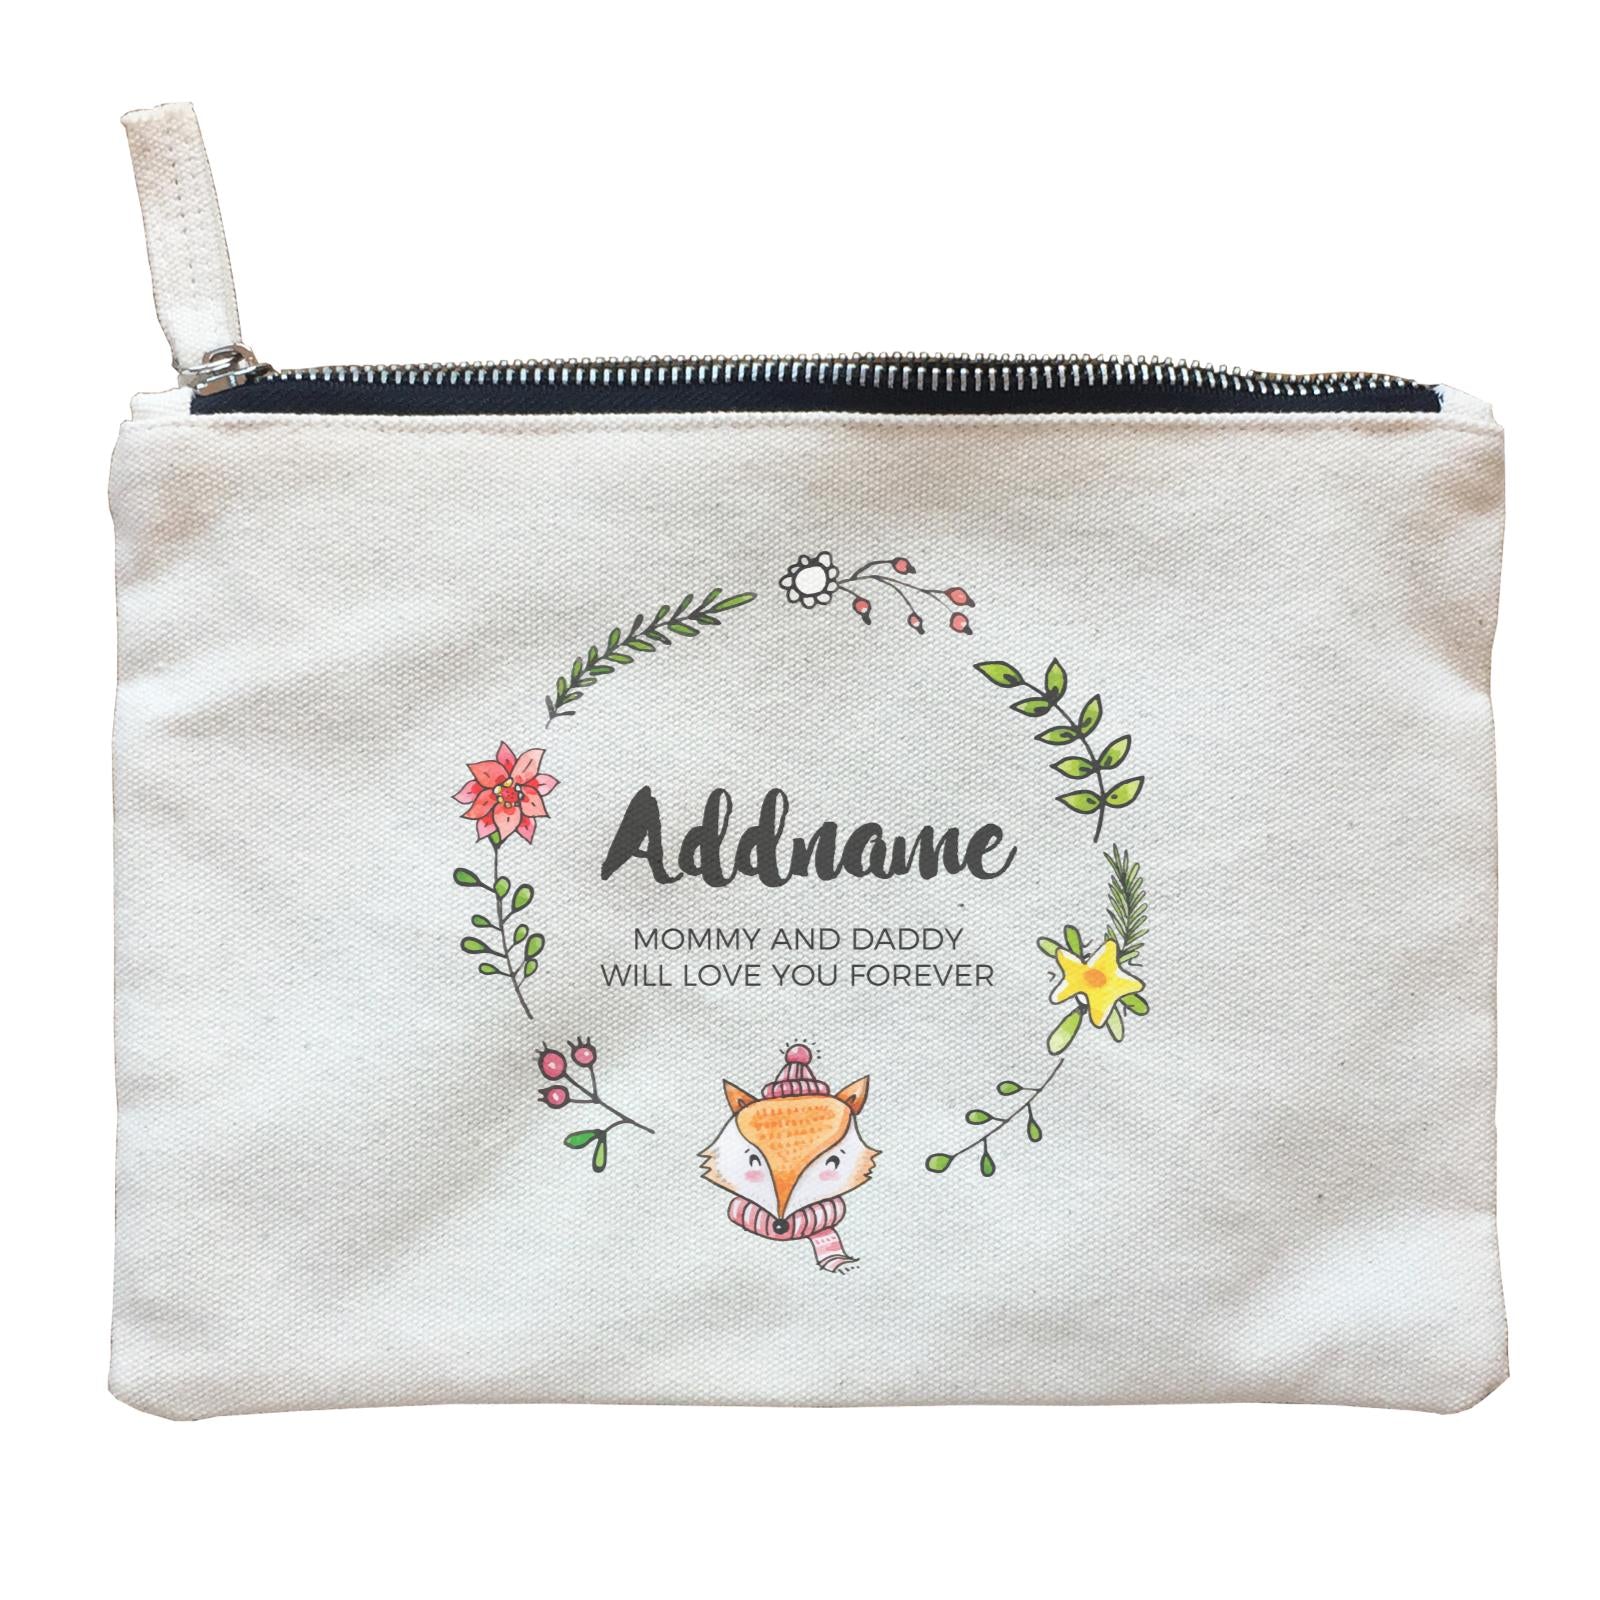 Doodle Green Wreath with Cute Fox Personalizable with Name and Text Zipper Pouch